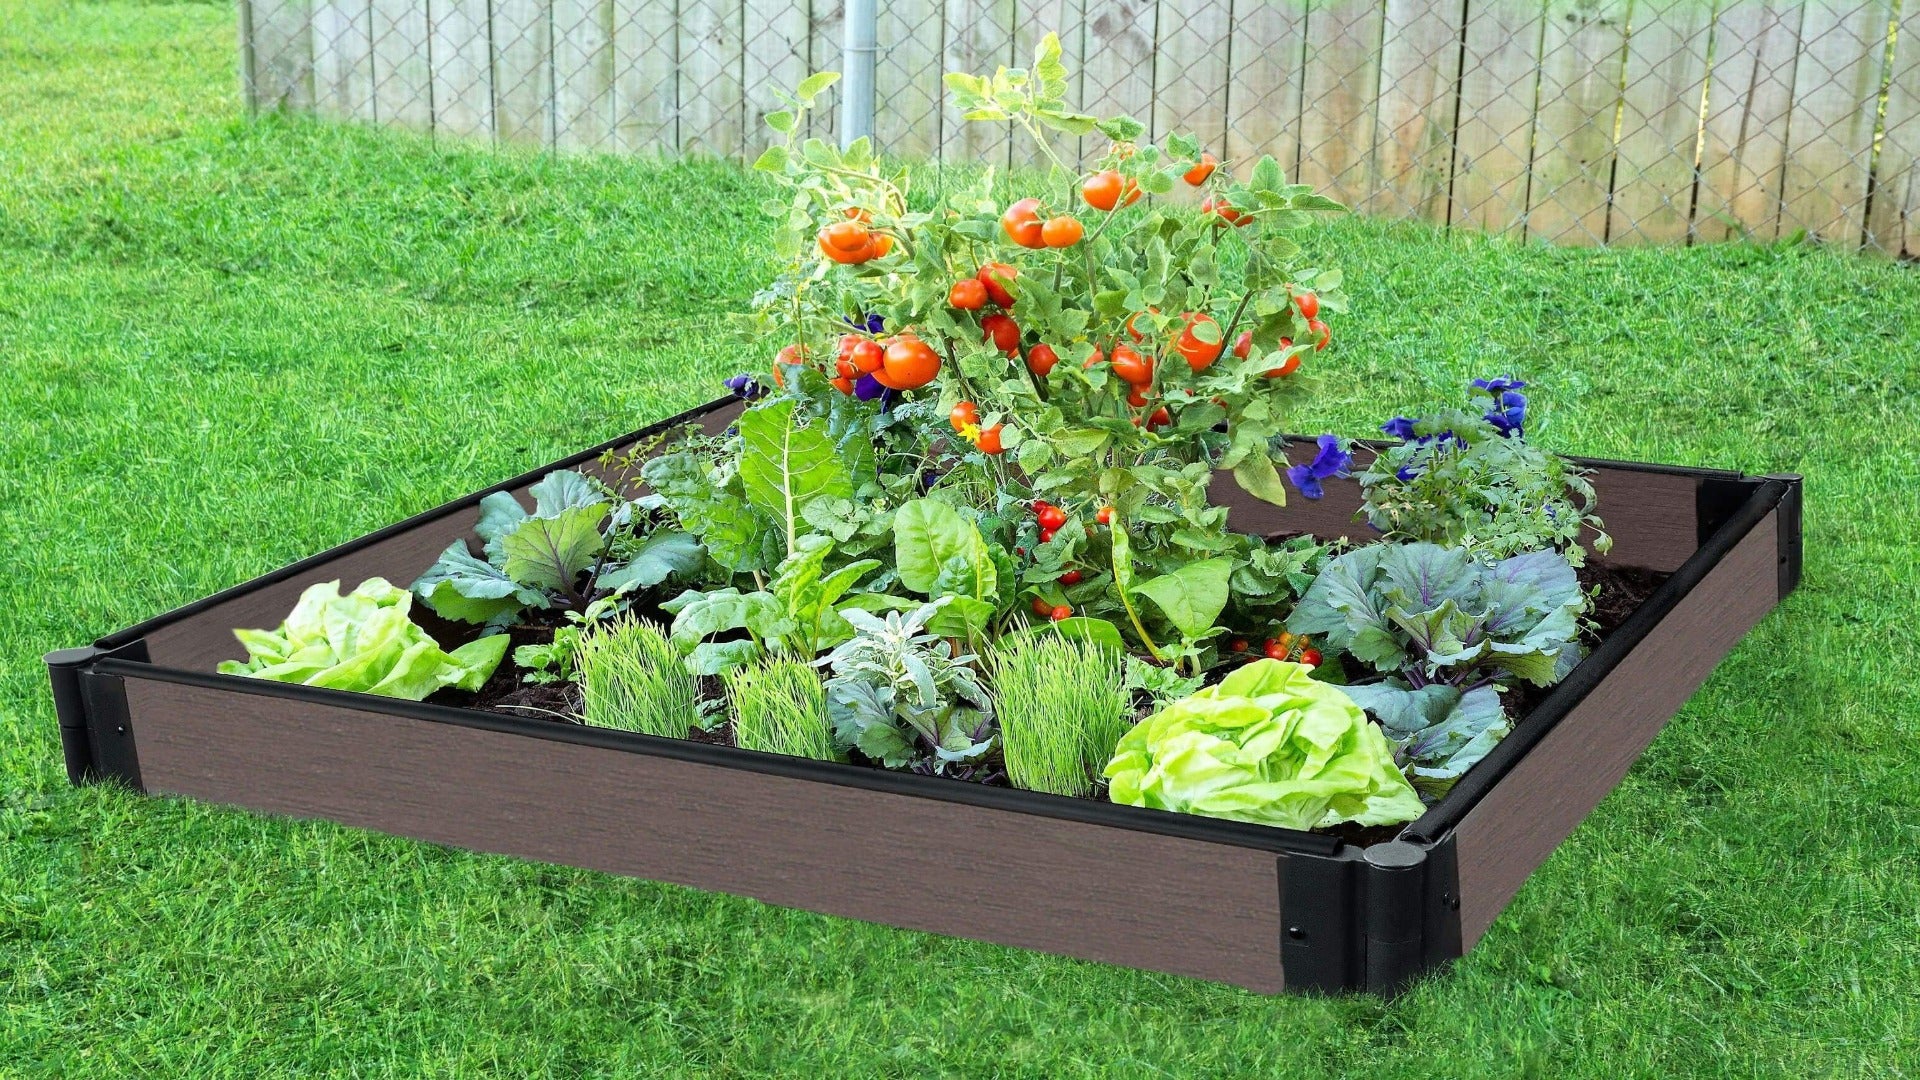 Tool-Free 4' x 4' Raised Garden Bed Raised Garden Beds Frame It All Weathered Wood 1